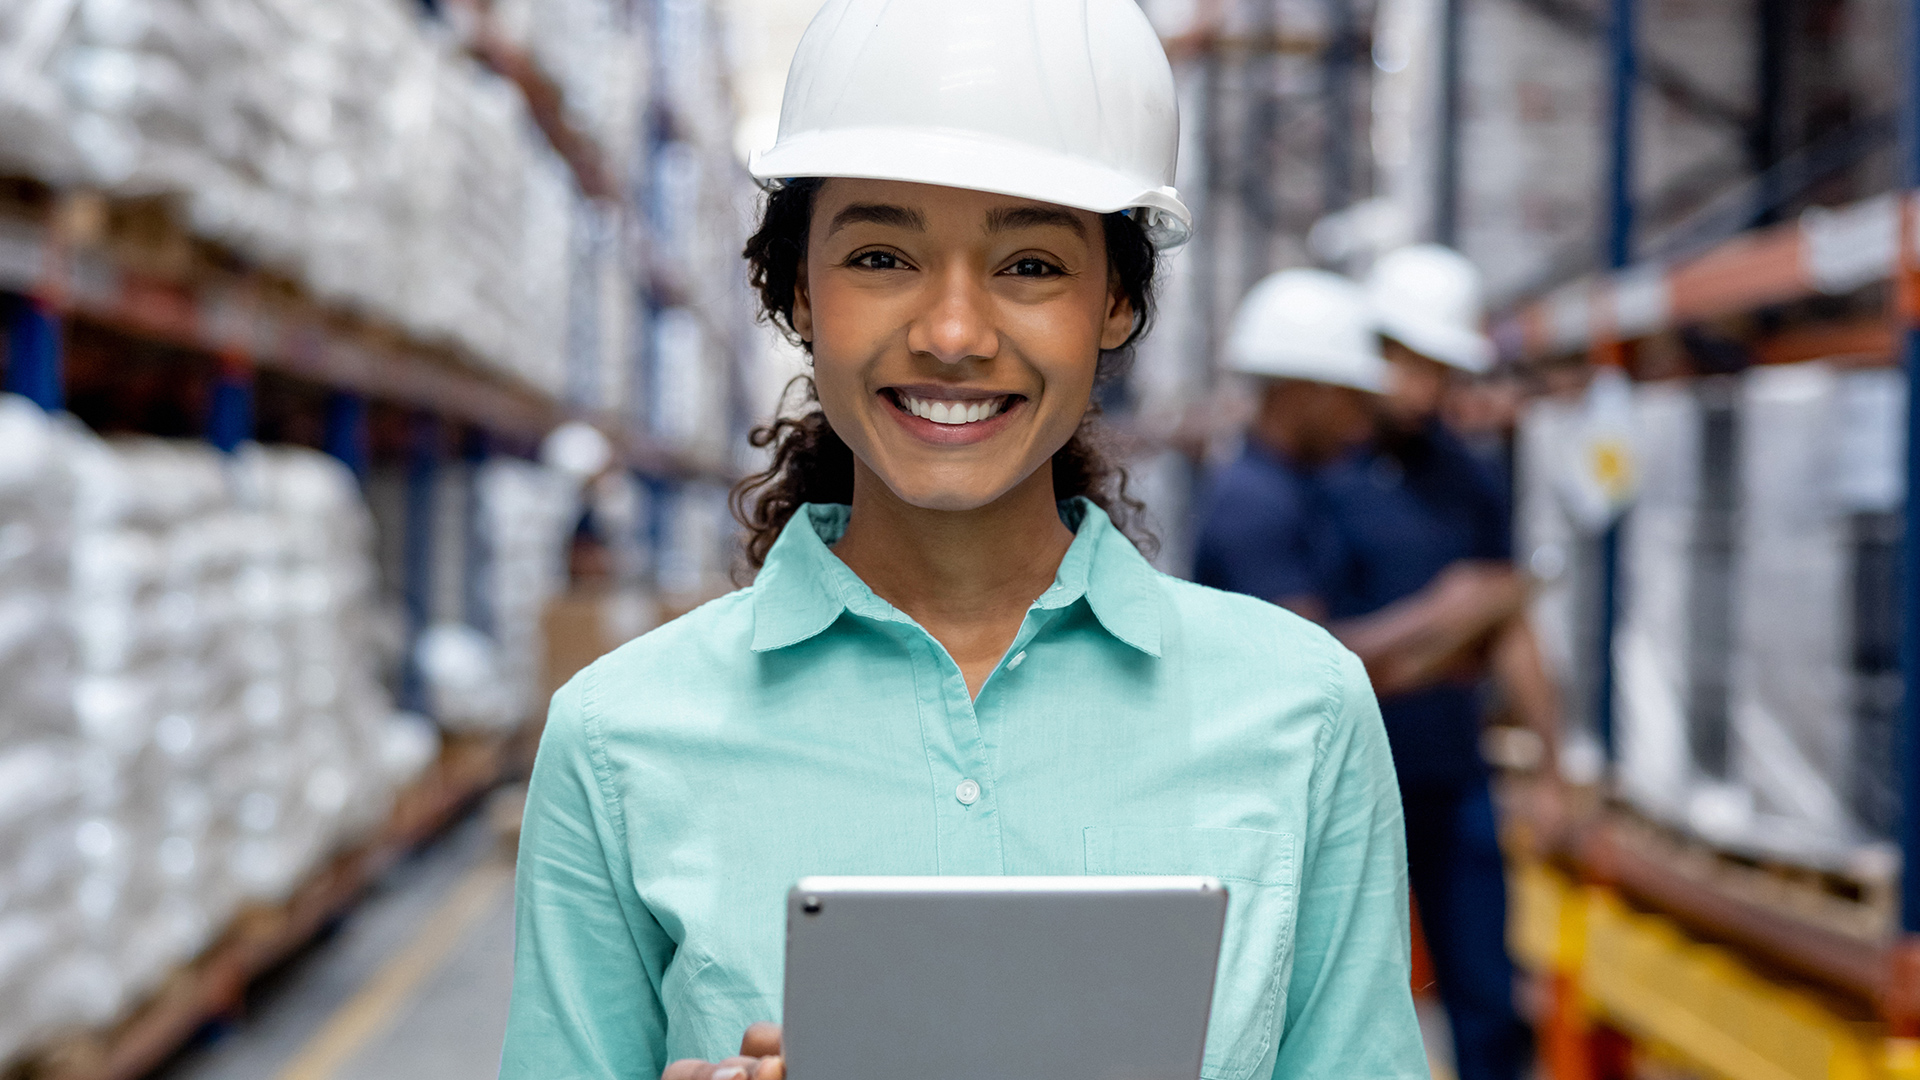 A woman wearing a helmet smiling in a production hall with a tablet in her hand.